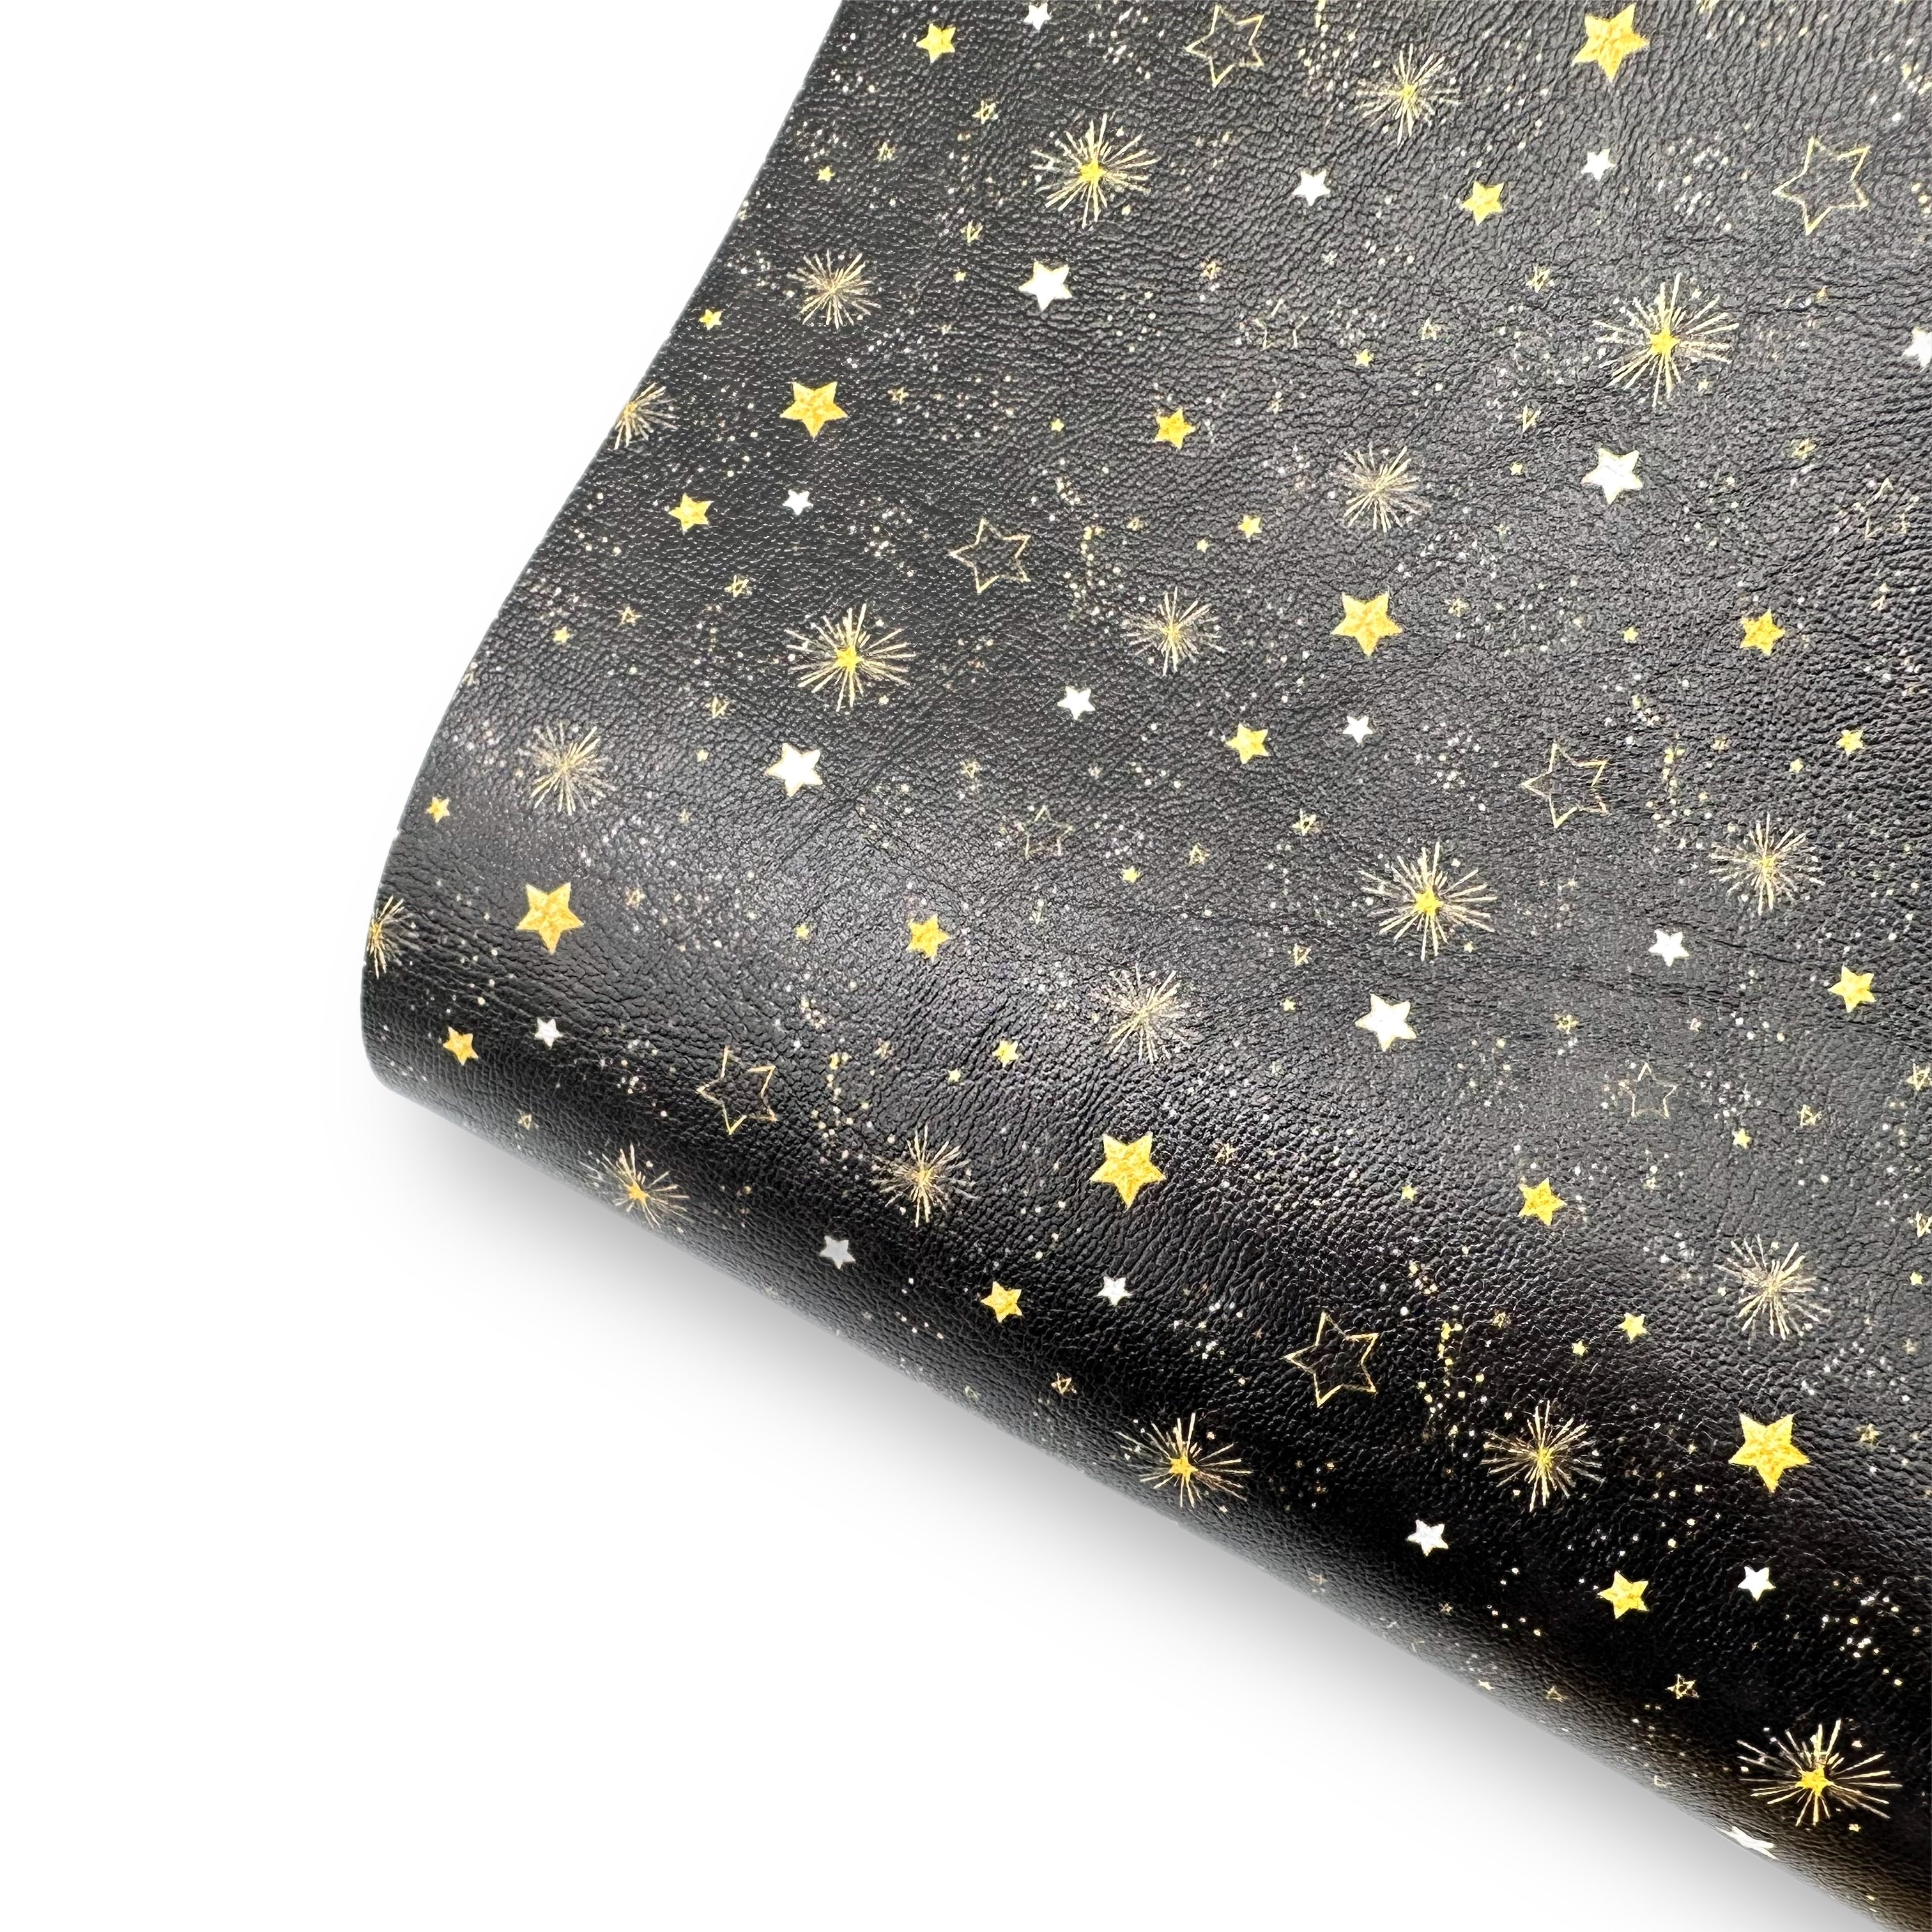 Stars & Fireworks Premium Faux Leather Fabric Sheets